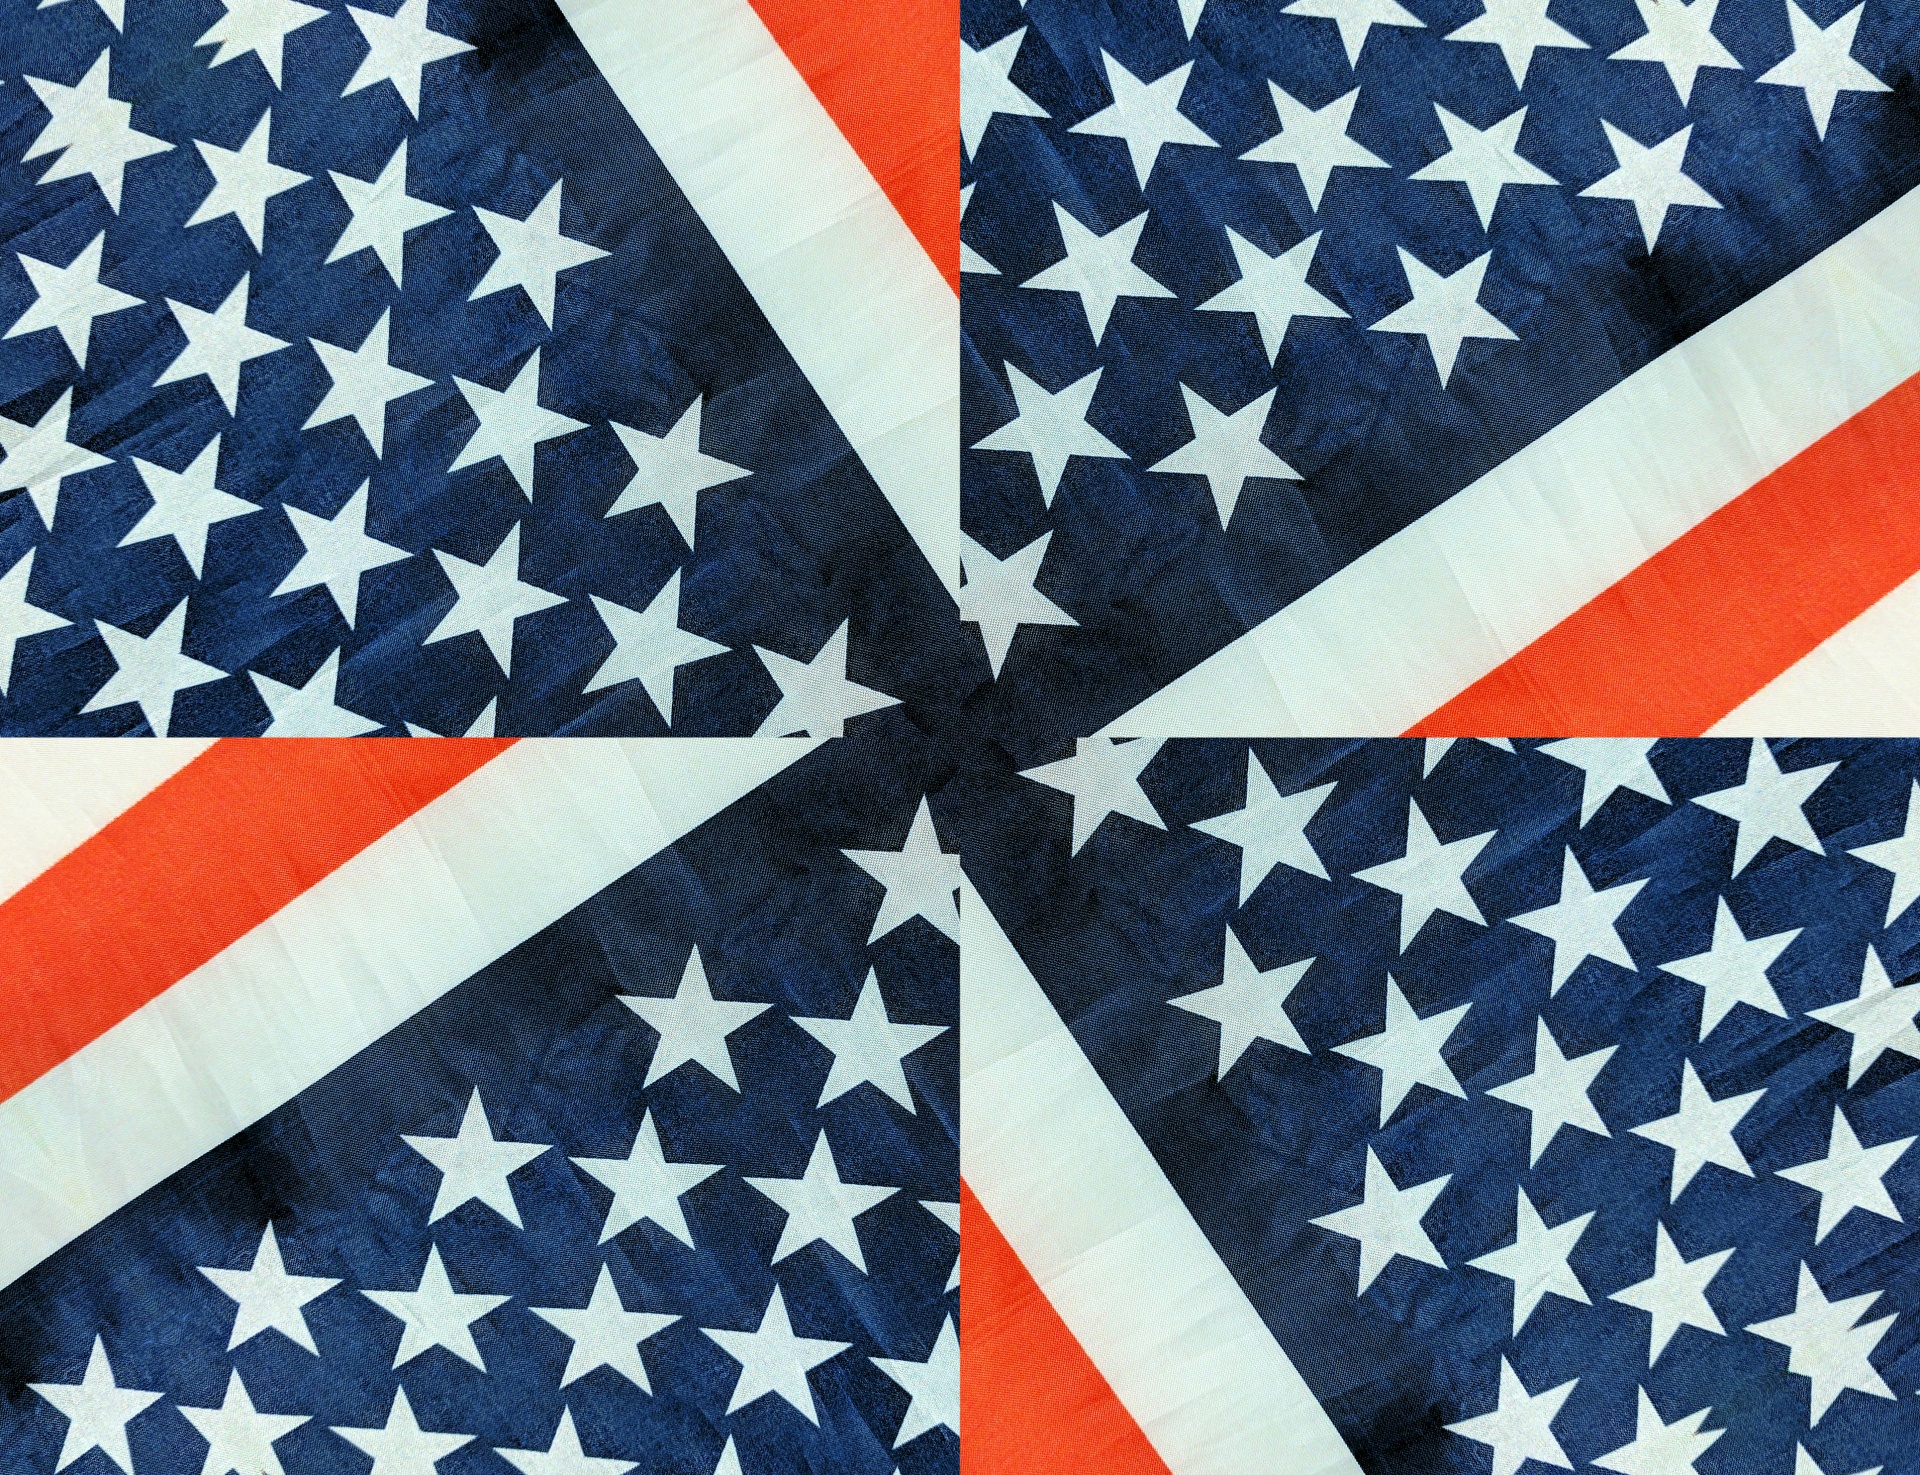 Stars And Stripes Background 8